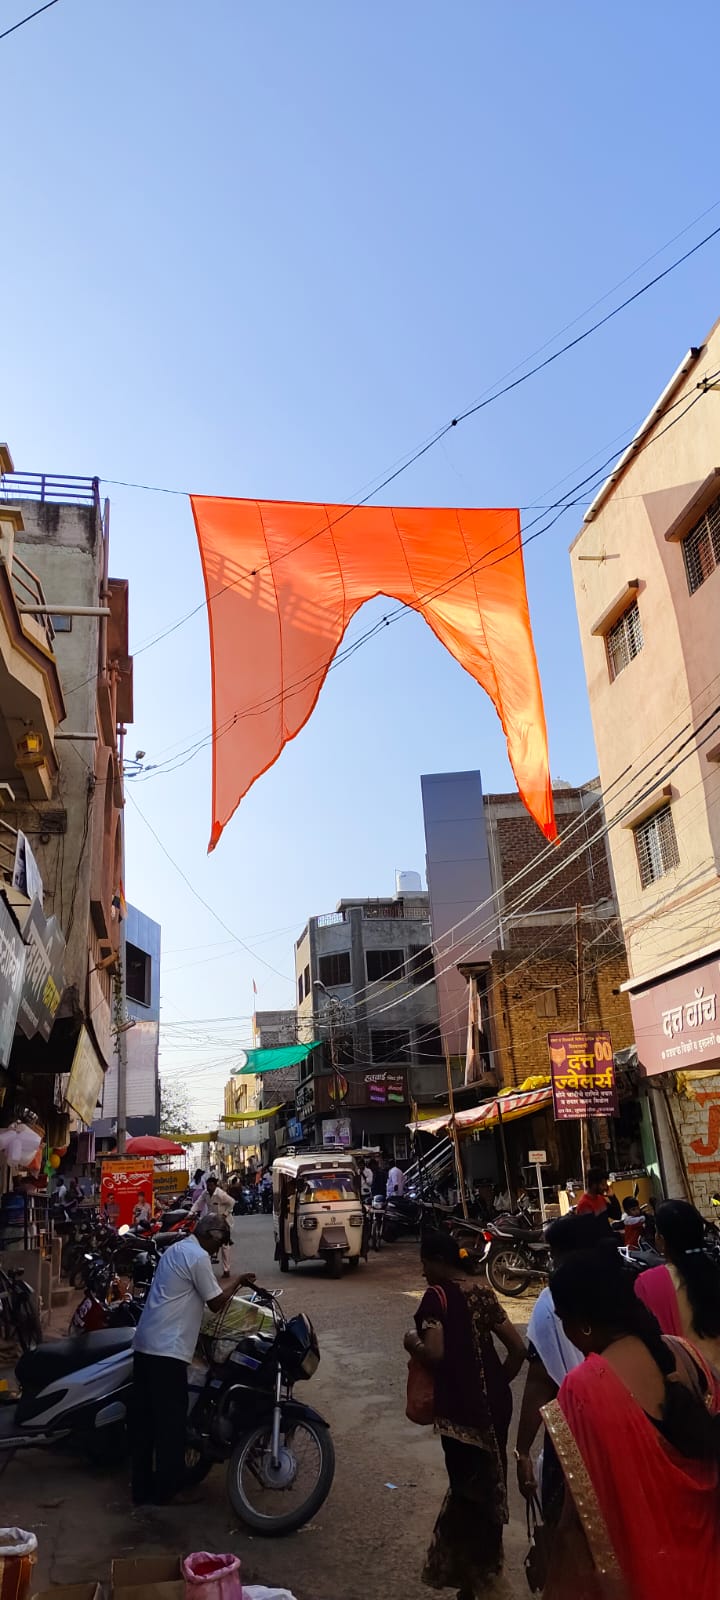 In the wake of the inauguration ceremony of the Ram Mandir in Ayodhya the saffron flag was in the Subhash Chowk in Karmala